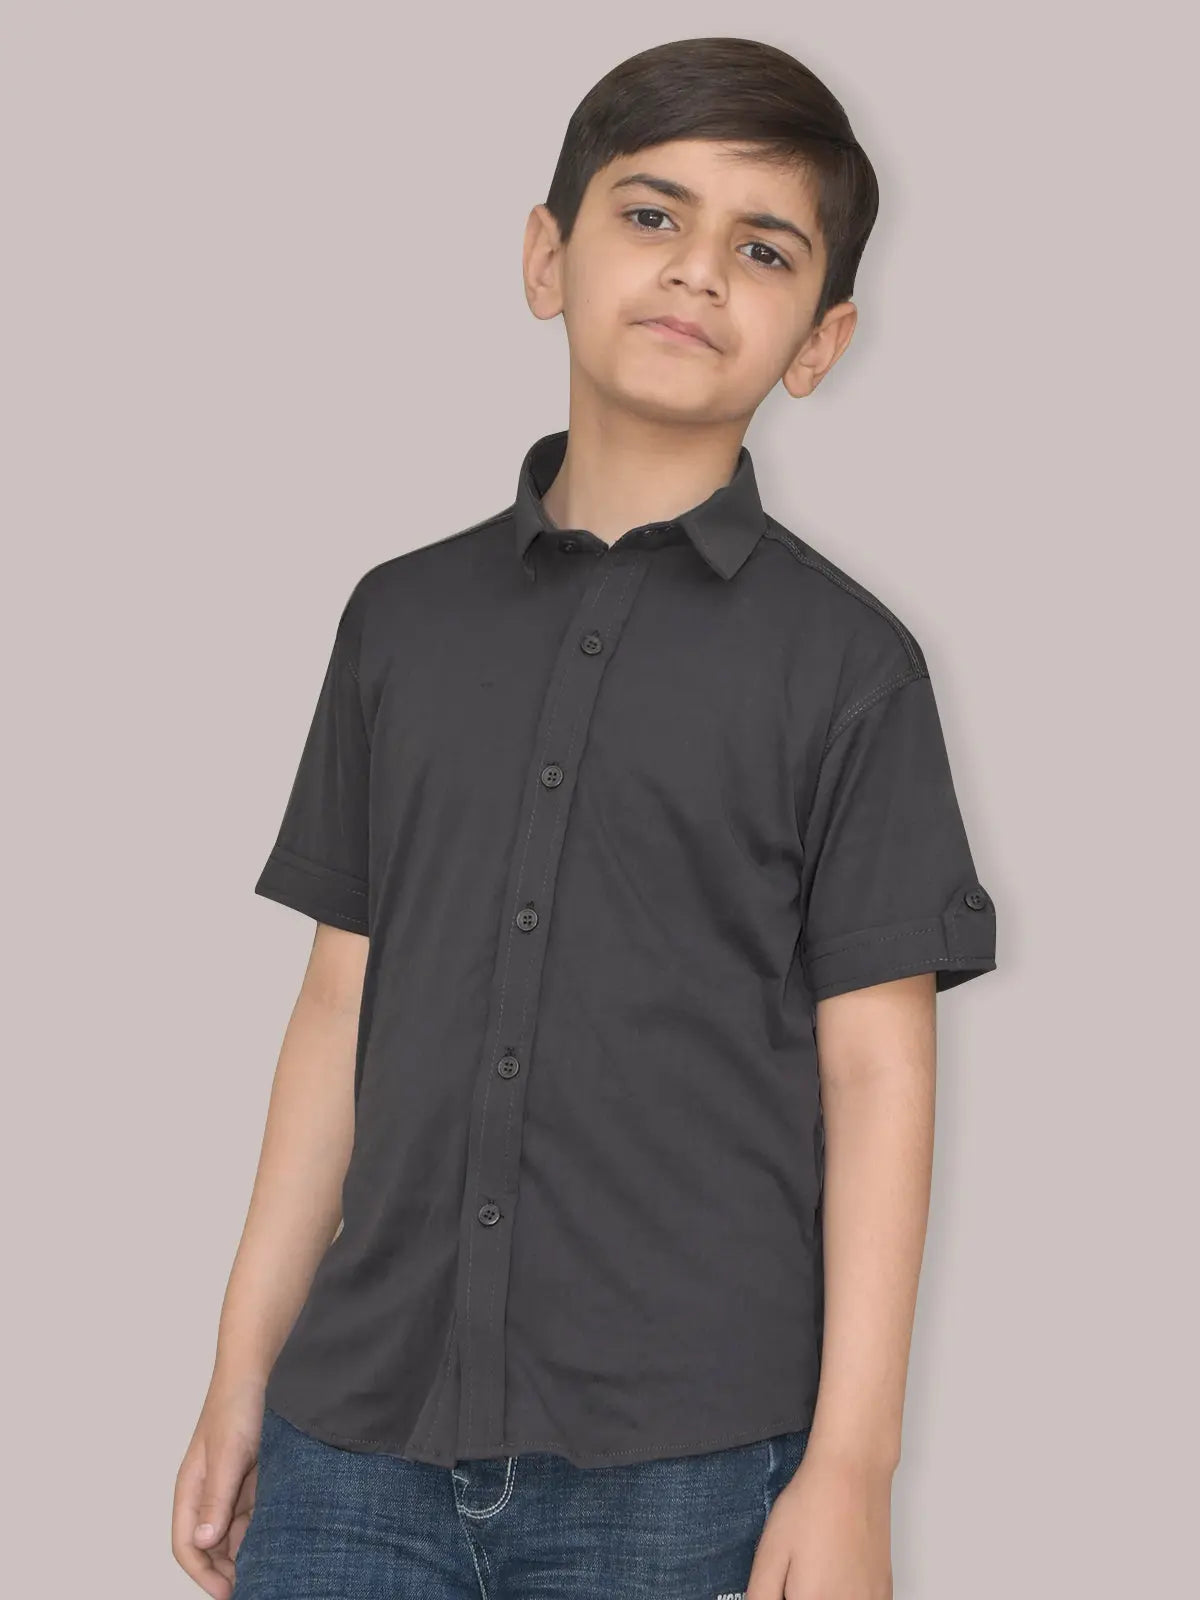 Louis Vicaci Super Stretchy Slim Fit Half Sleeve Lycra Casual Shirt For Kids-Rosy Black-BE39